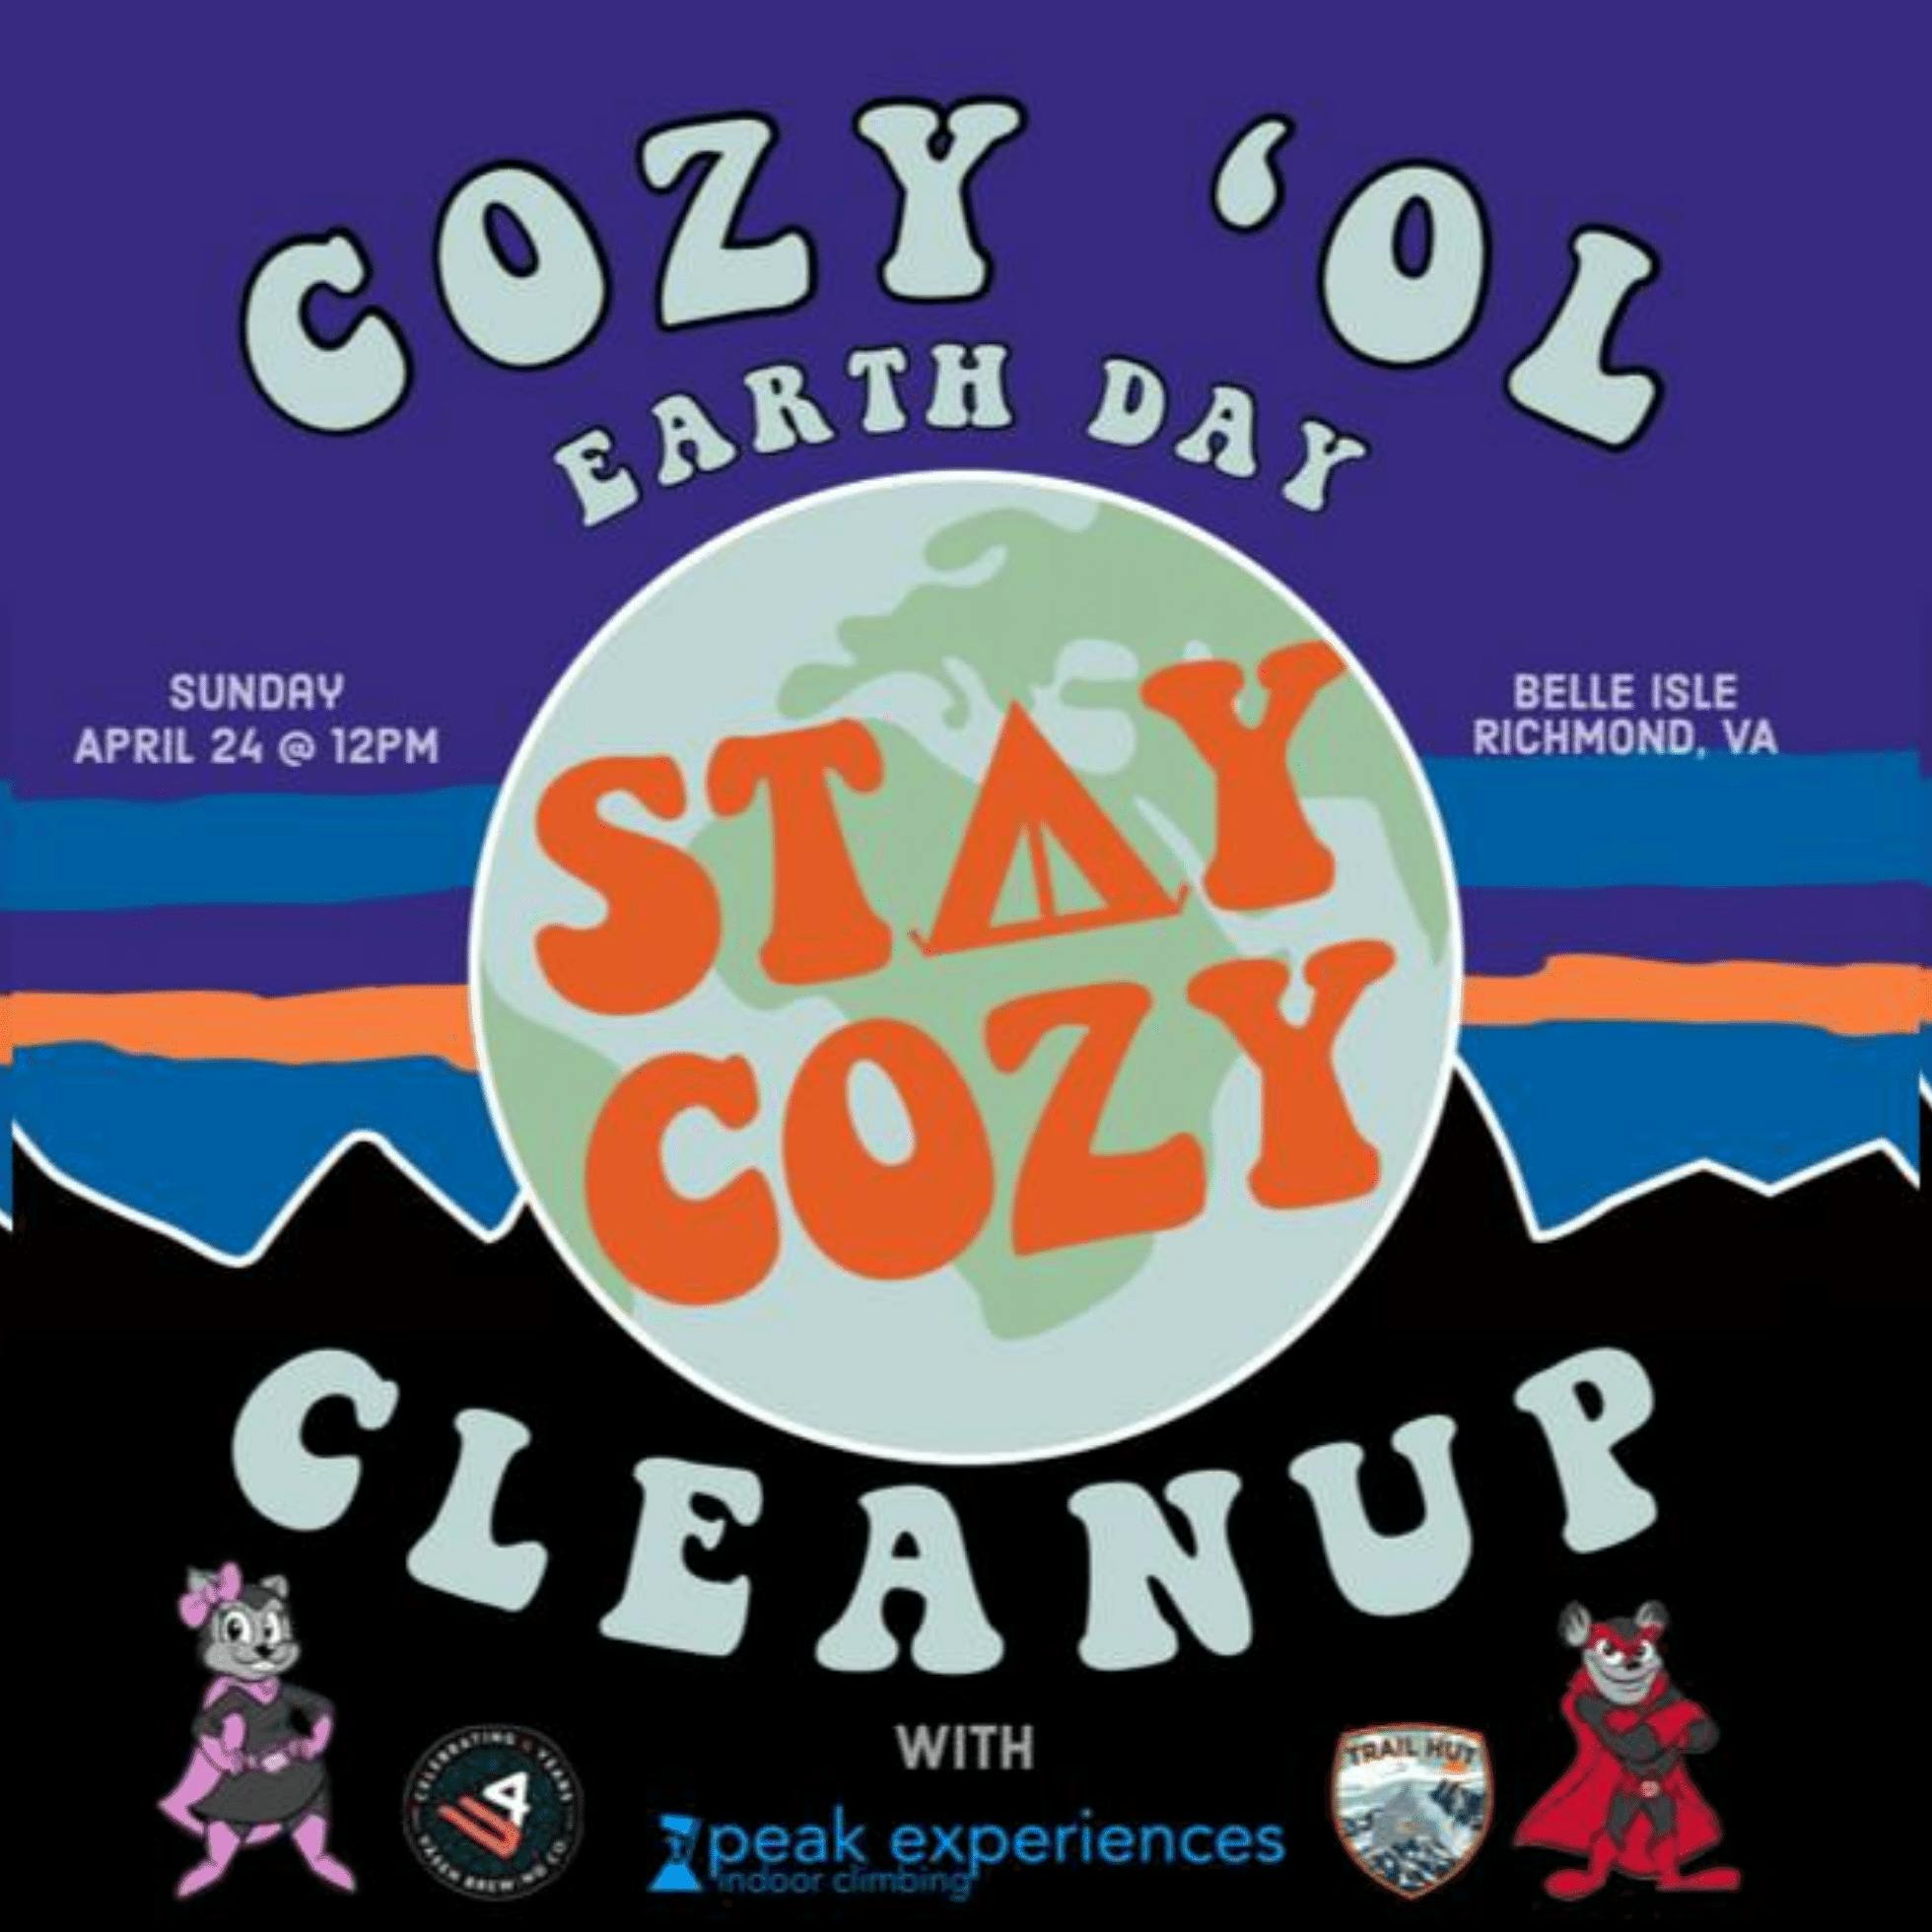 Cozy ol’ Earth Day Event